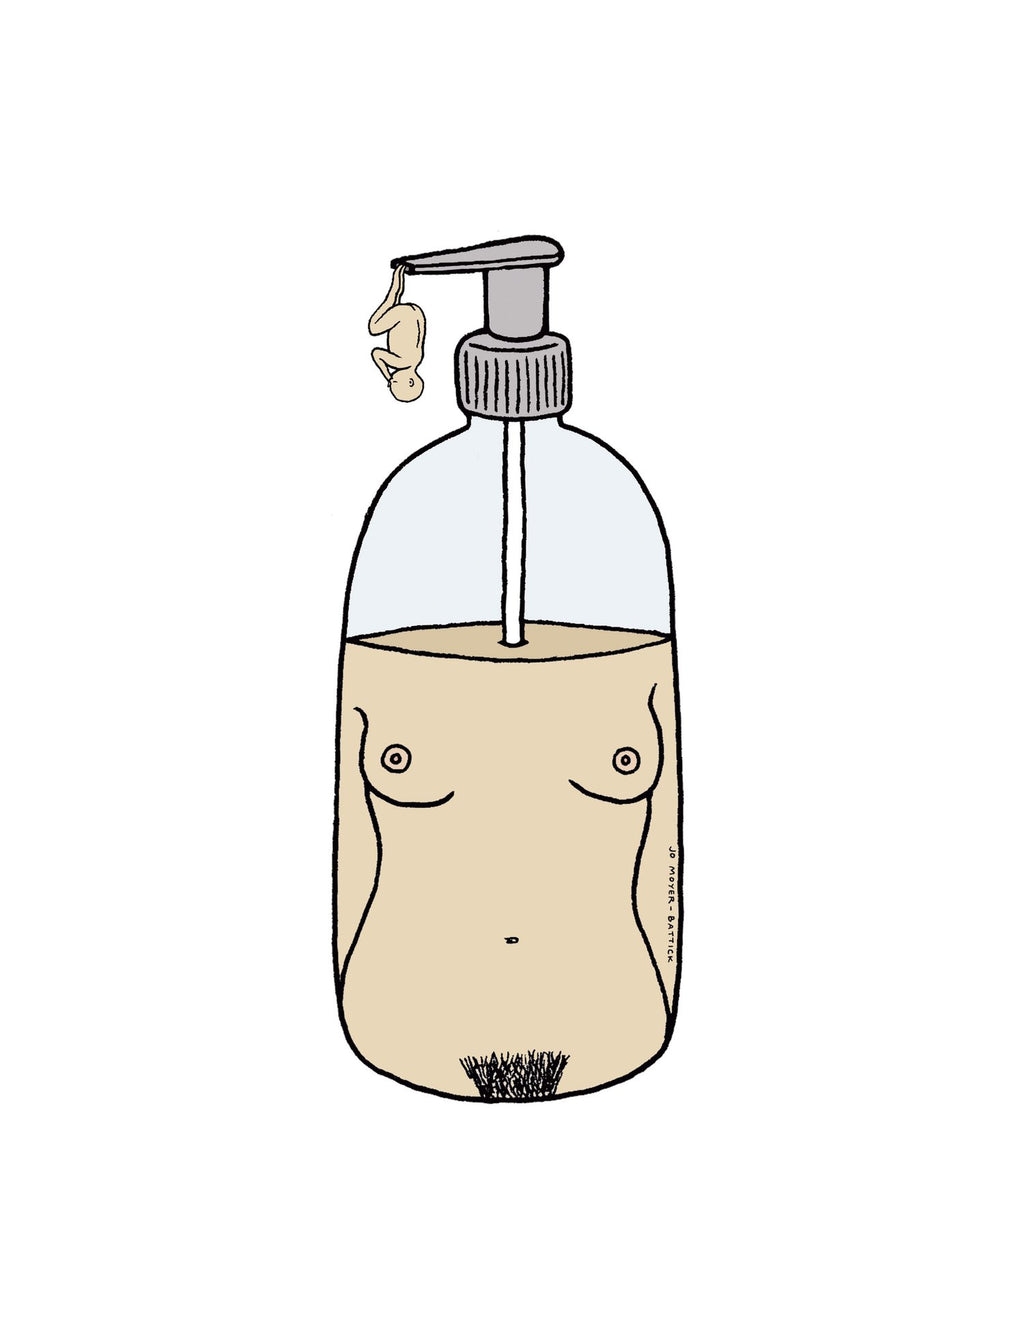 Baby Bottle 8.5x11in Giclee Print